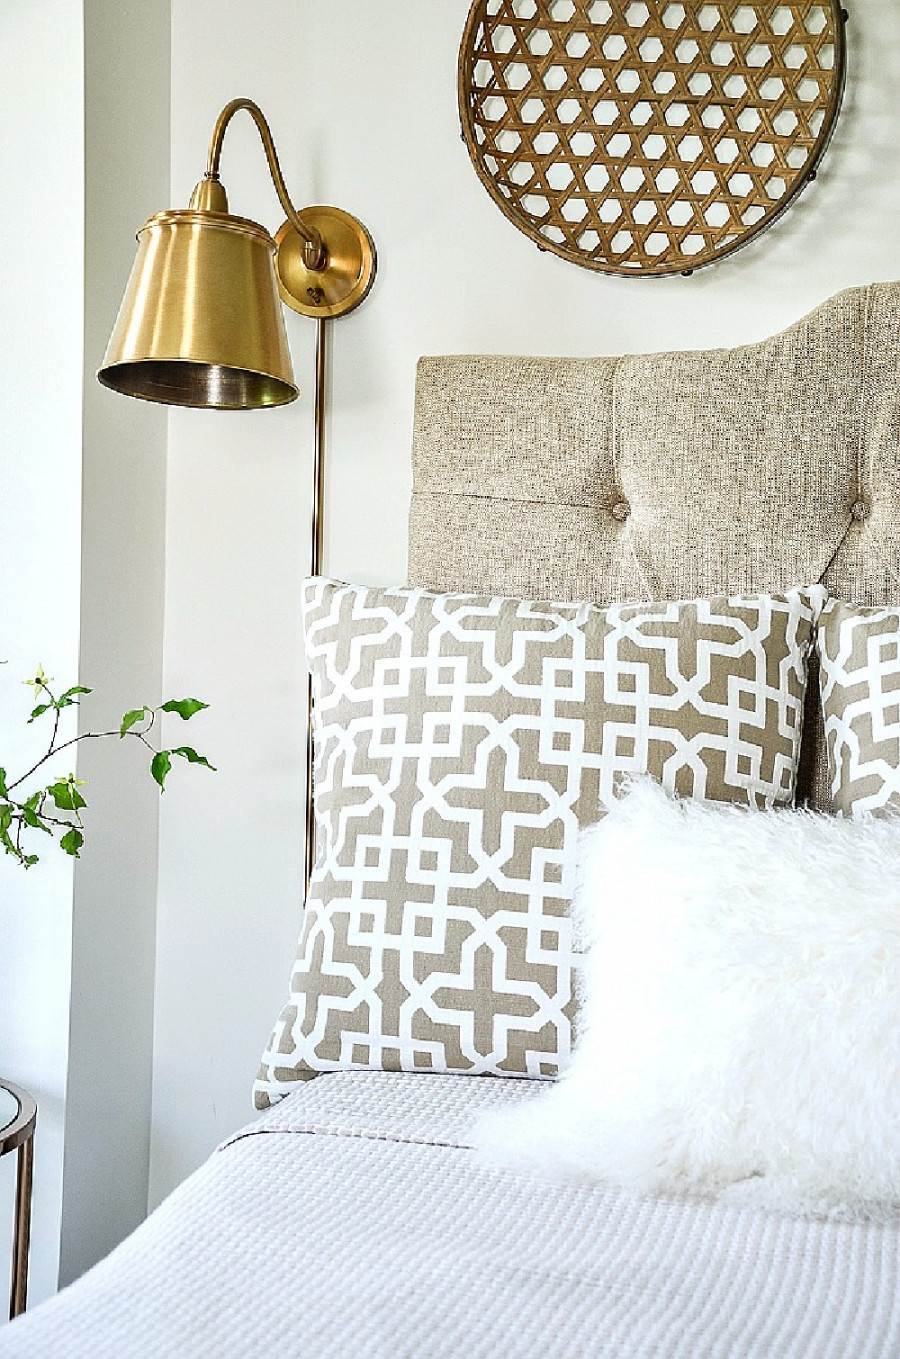 How to Arrange Pillows On a Bed, Per Designers, Havenly